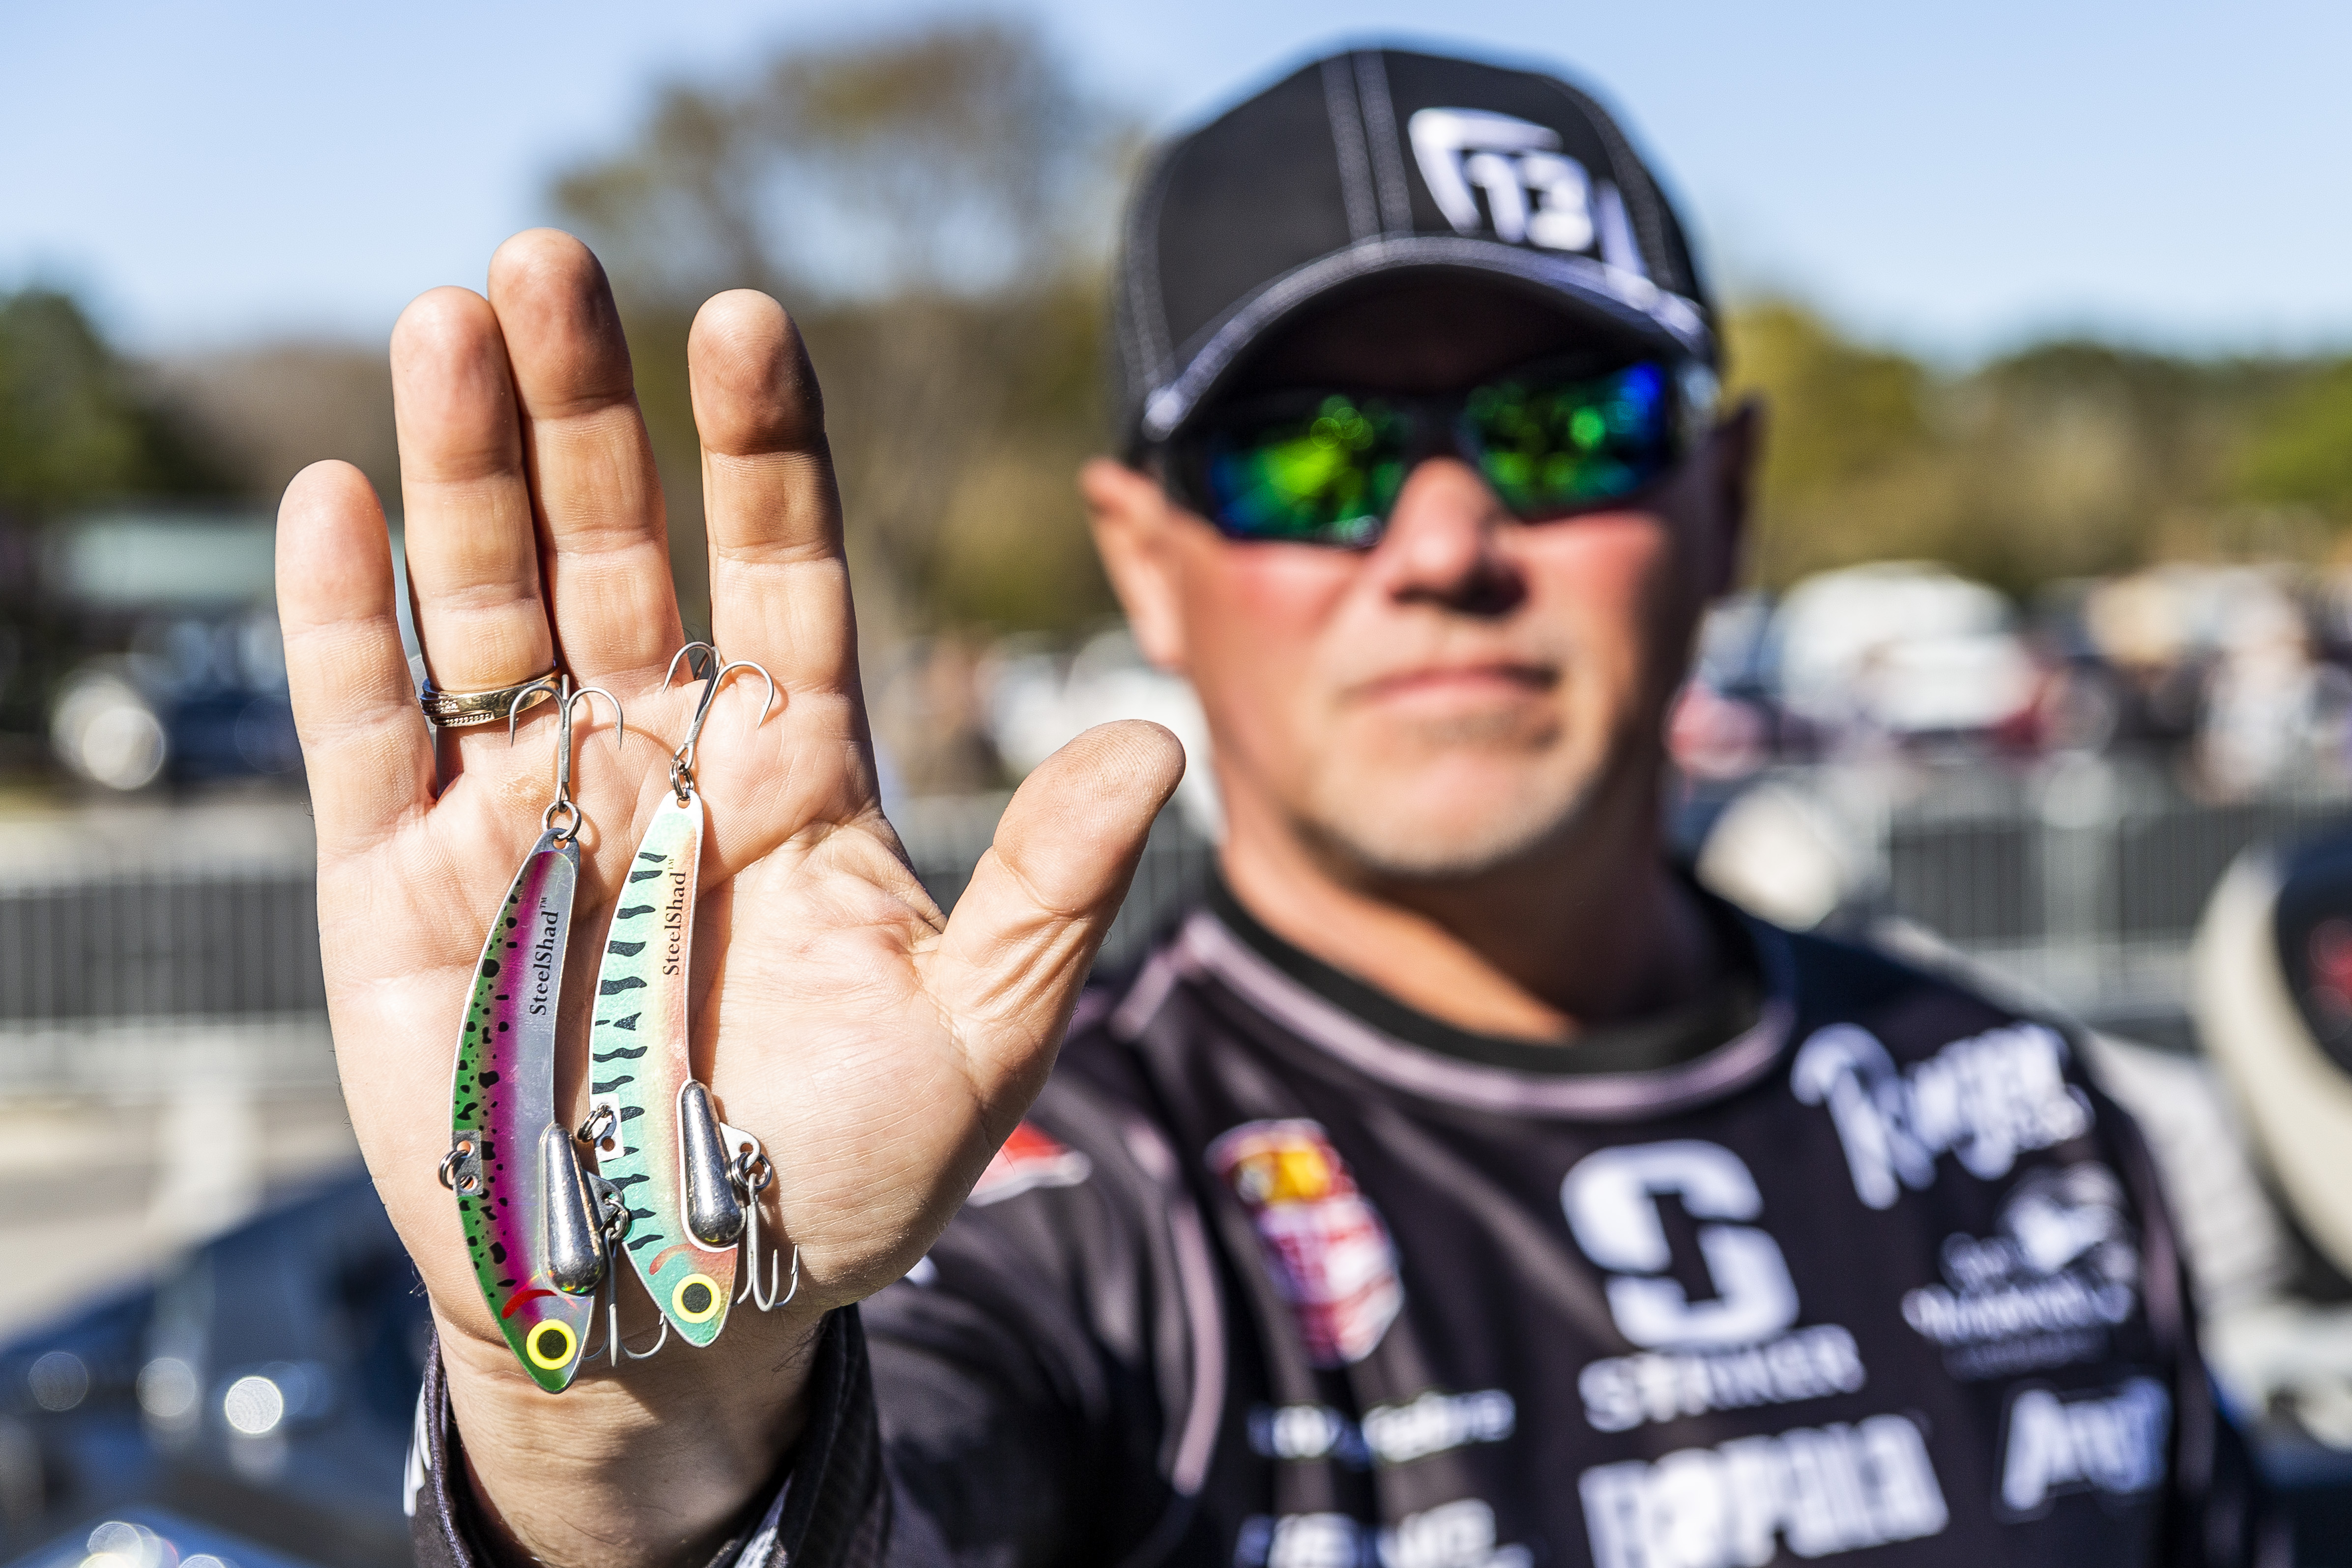 Breaking Down the Blade Bait with Dave Lefebre - Major League Fishing